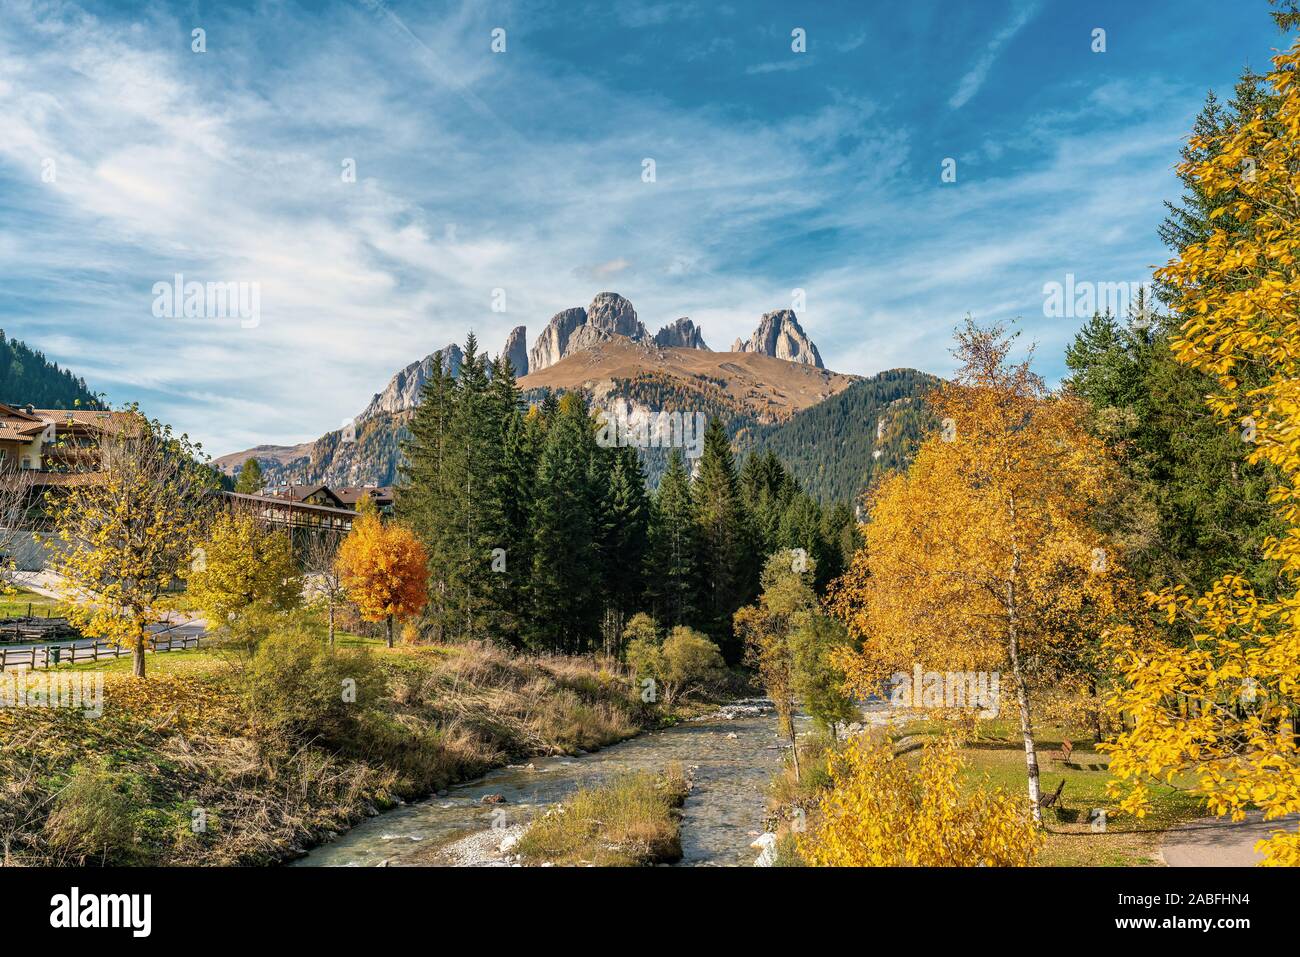 Colourful autumn picture of the Sella massif mountains and the Avisio river in the village Alba di Canazei in South Tyrol, Italy Stock Photo